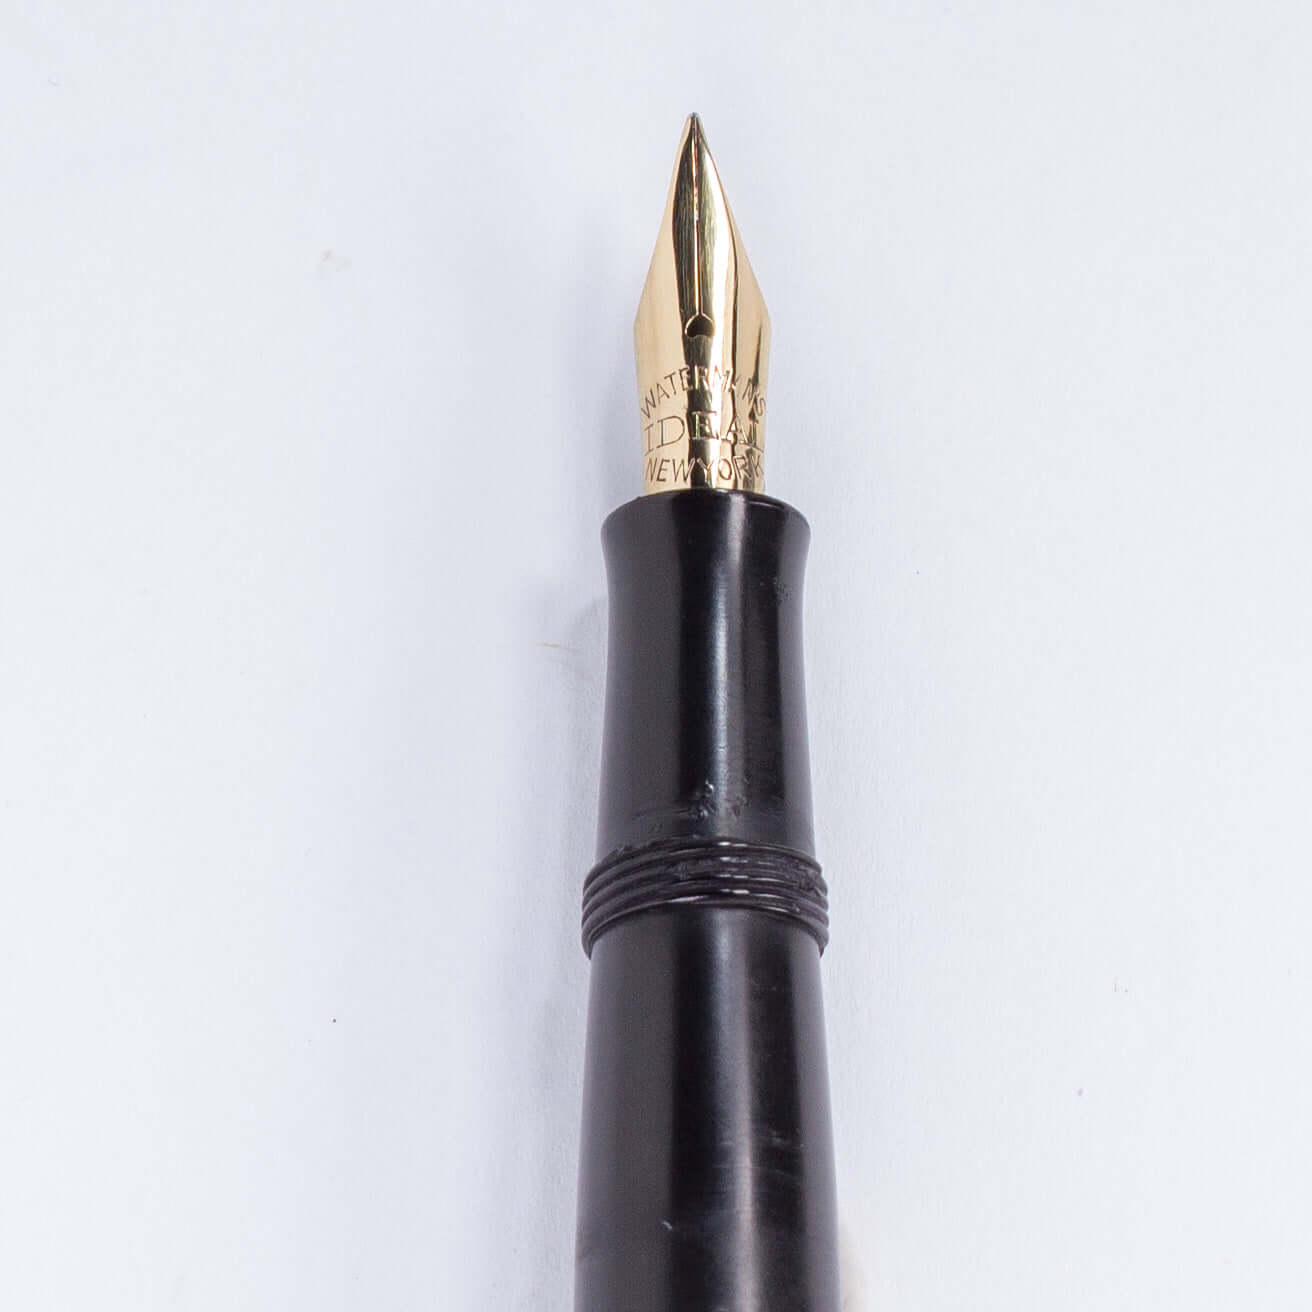 ${titleName/Type: Waterman 12 VP Manufacture Year: Circa 1910-1920s Length: 4 Filling System: Eye-Dropper Color/Pattern: Black hard Rubber, Smooth Barrel and Chased Cap Nib Type/Condition and remarks: Very responsive 14K Gold Waterman nib, size #2 Conditi